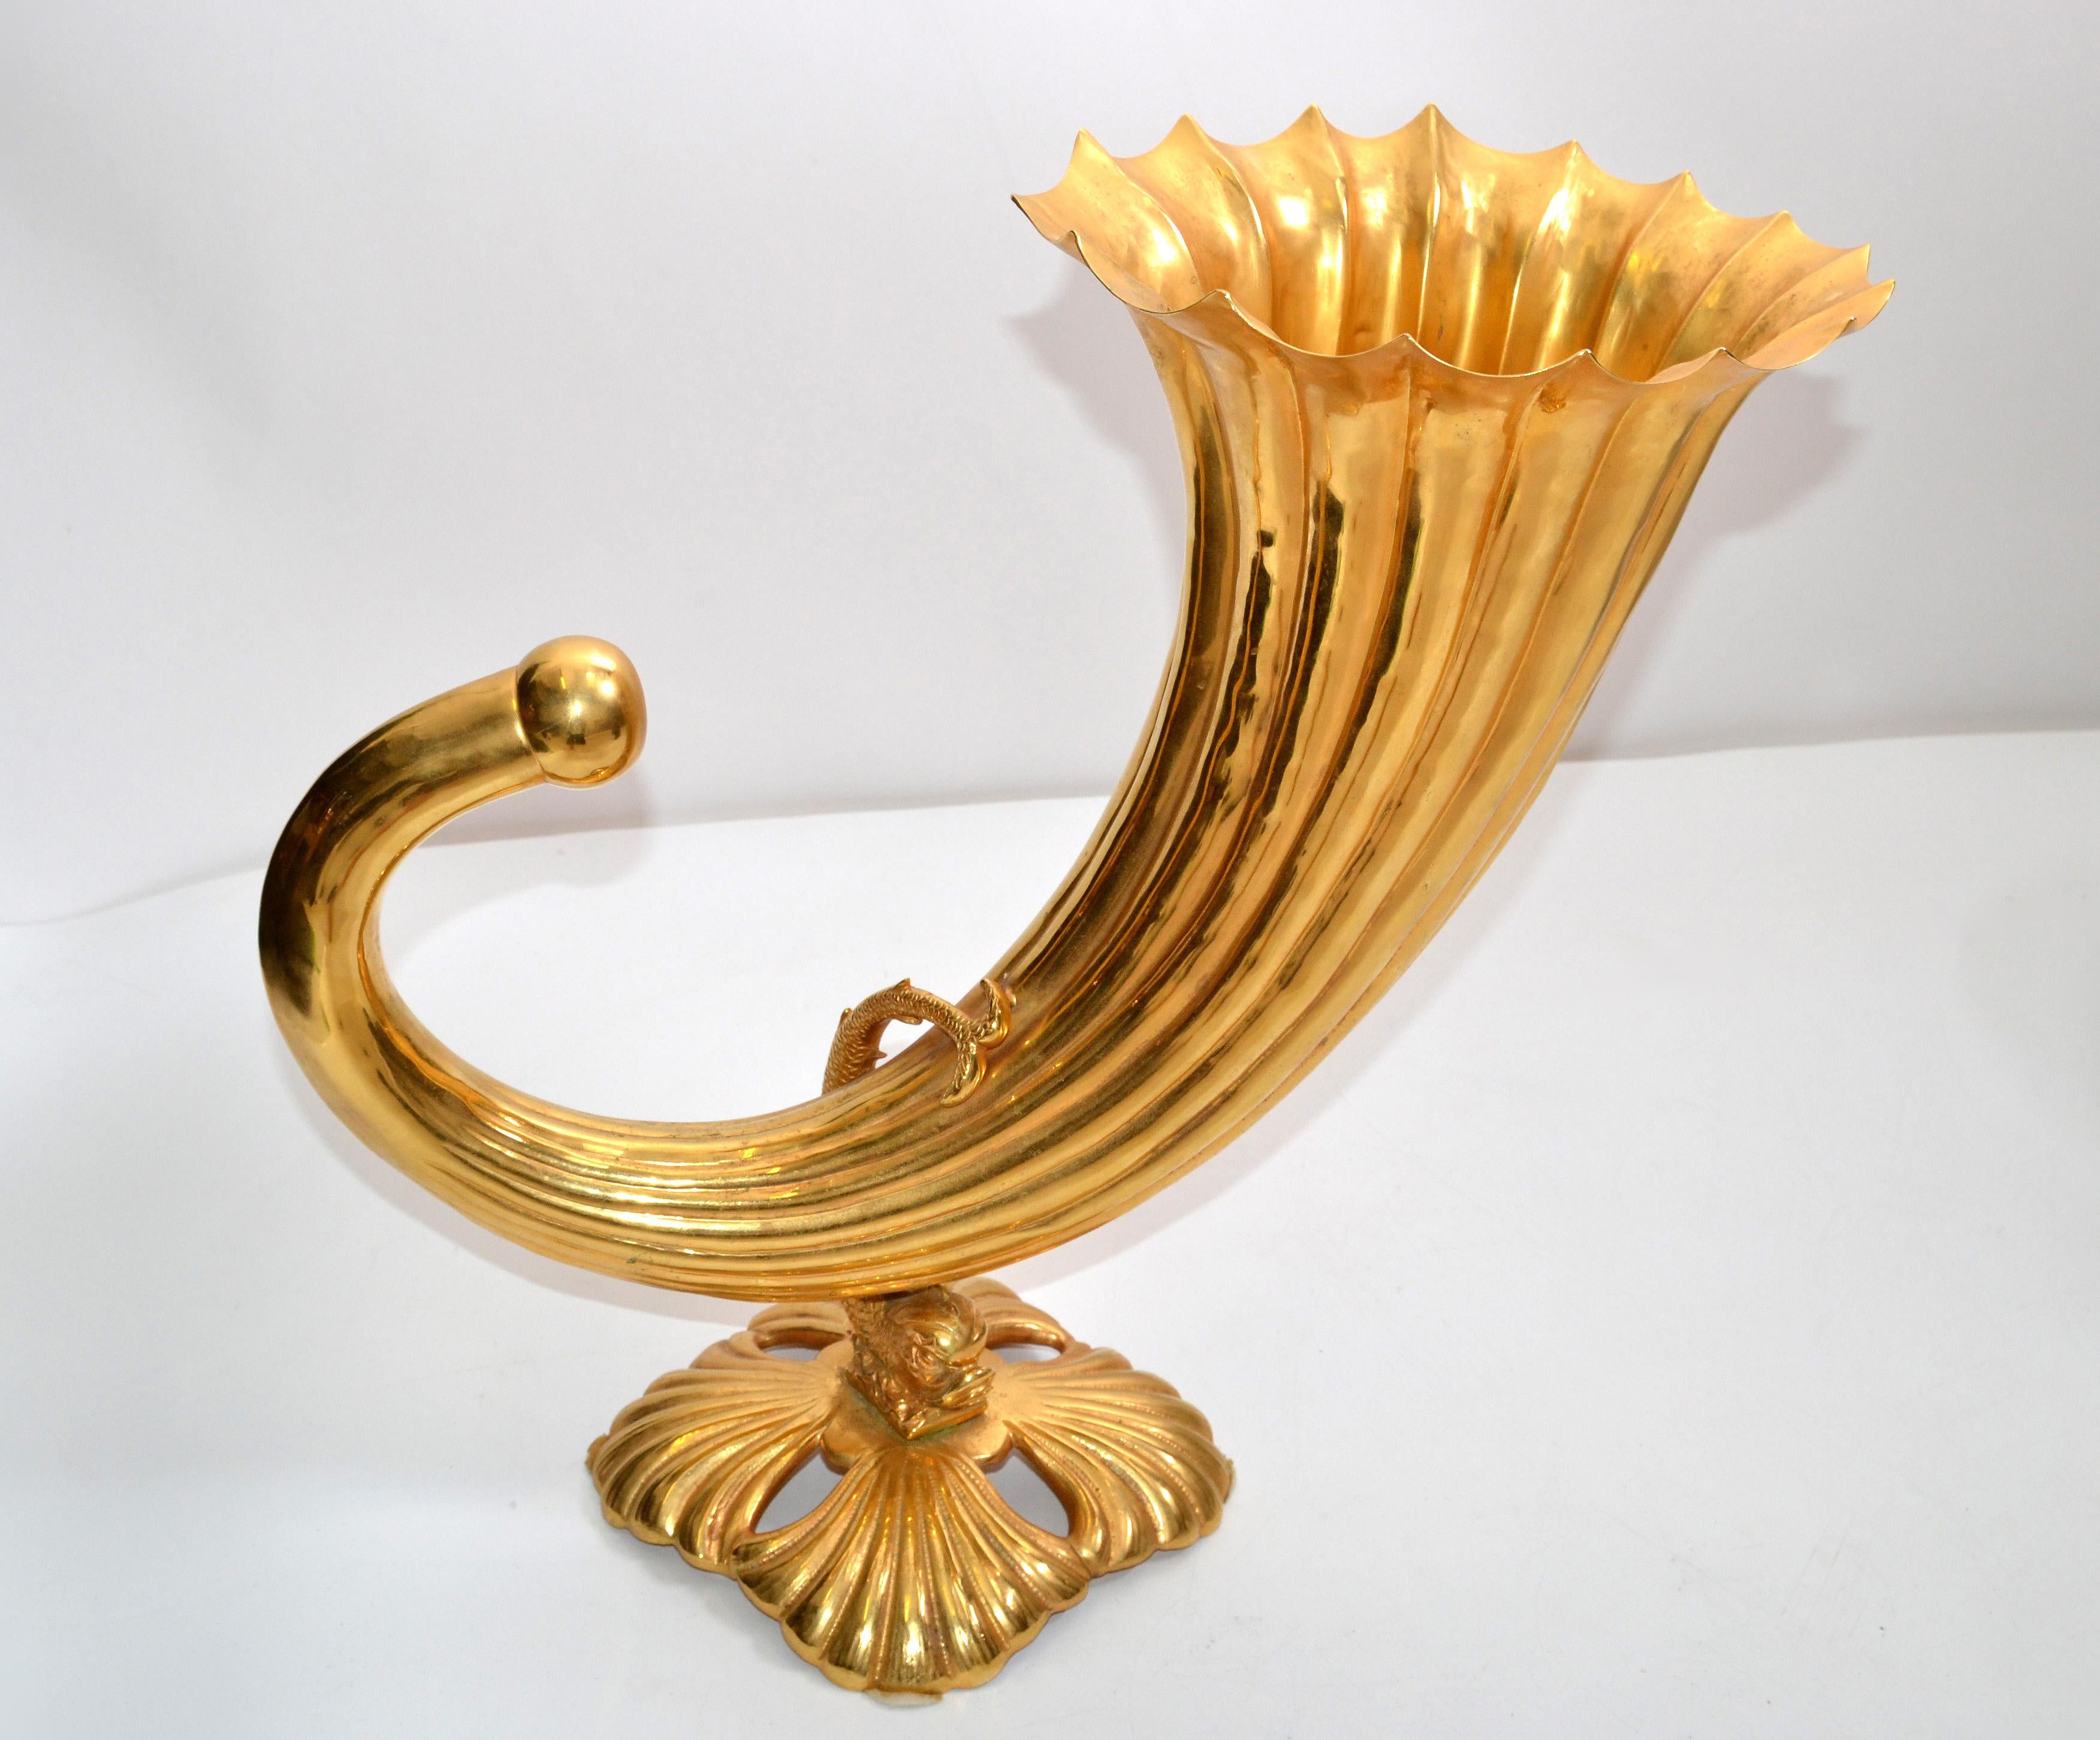 Art Nouveau Italian cornucopia vase in gilt bronze from the late 20th century.
The neck is surrounded with a Sea Serpent and is mounted firmly on a square base. 
The Cornucopia Vase is in good vintage condition with some tarnish inside the fill